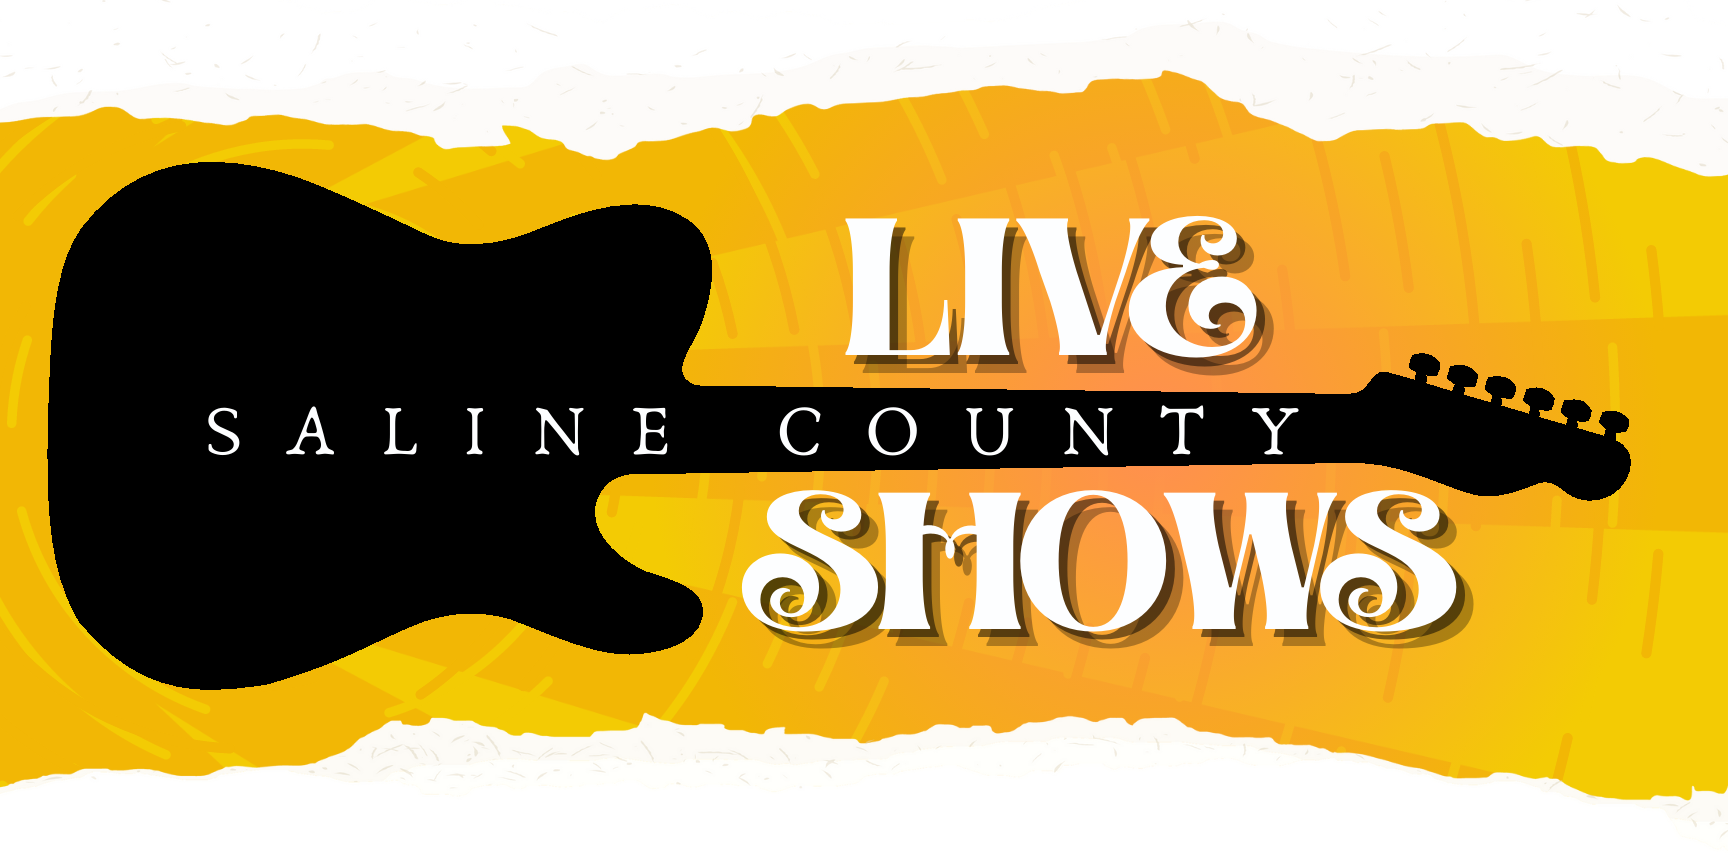 Find live shows in Saline County Arkansas and submit your own. Music, magic, theater and more. www.mysaline.com/live-shows